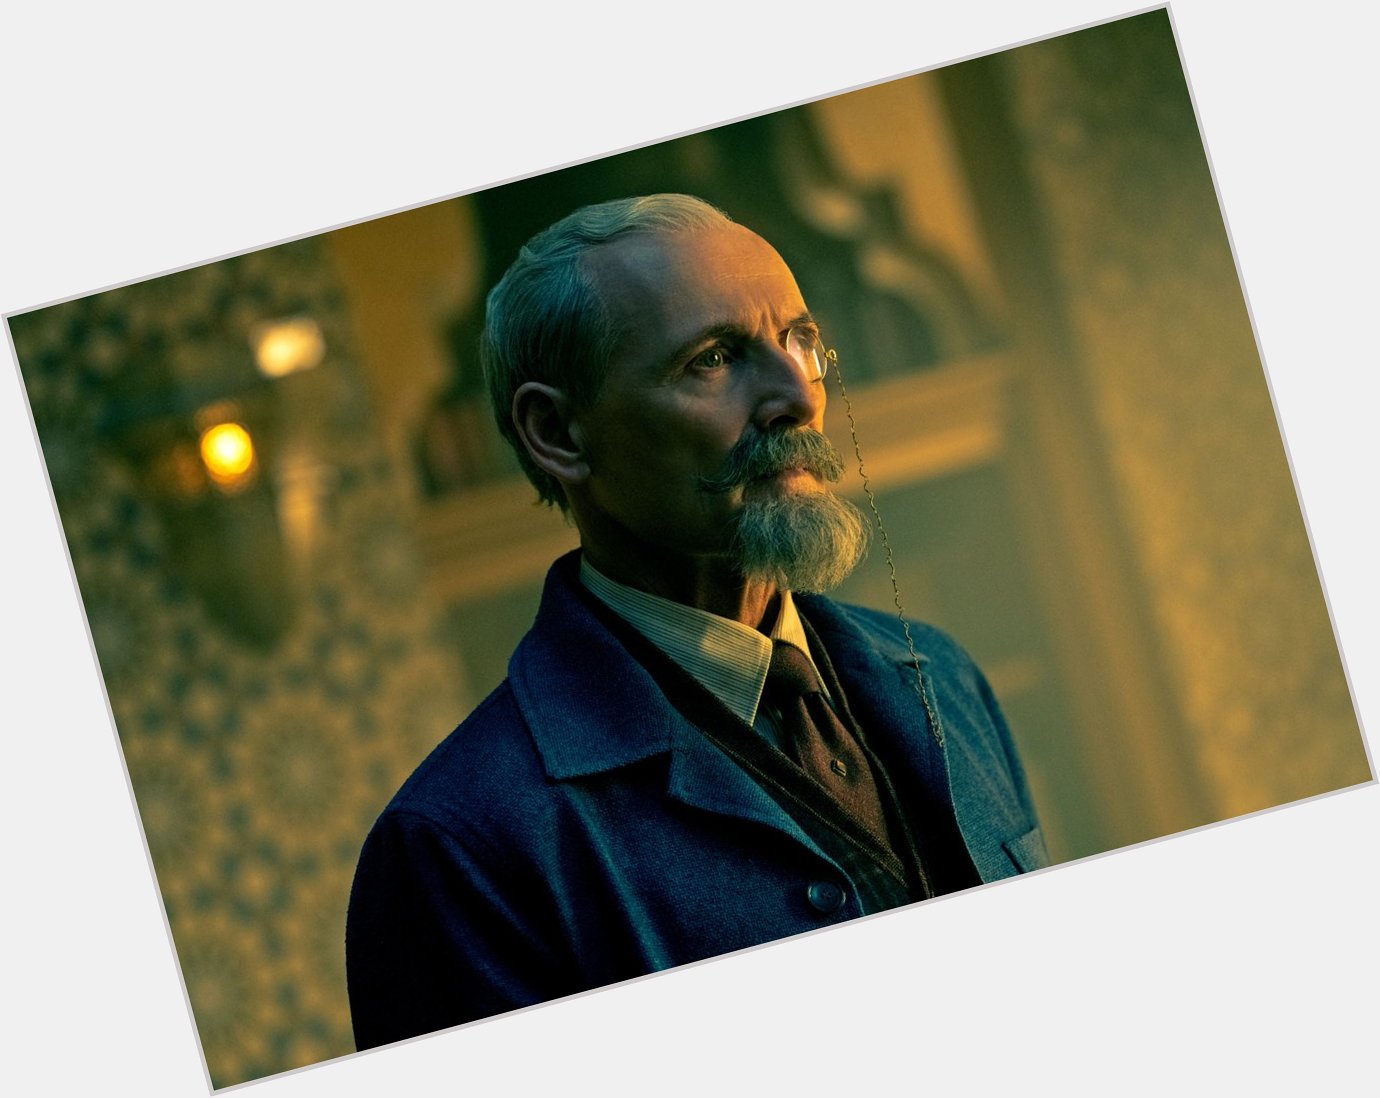 Happy birthday to Colm Feore, who portrays Umbrella Academy founder Sir Reginald Hargeeves in 